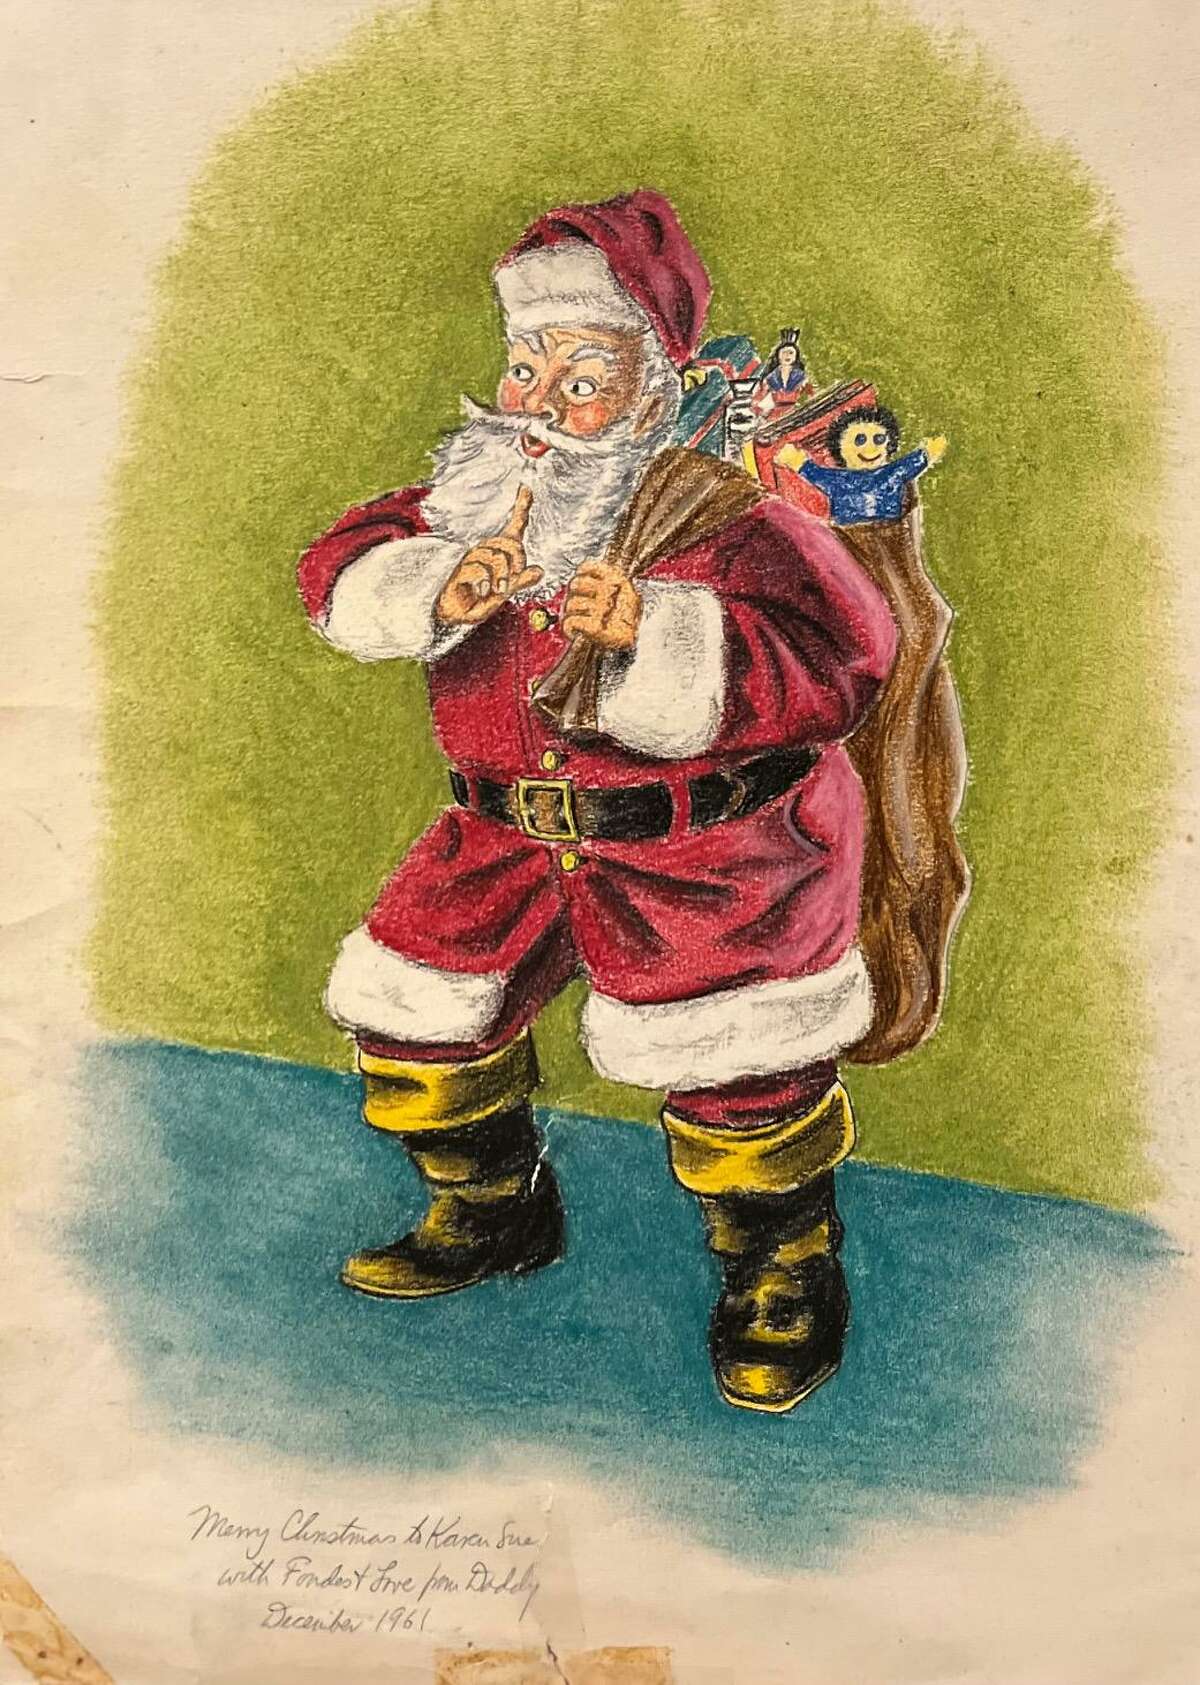 Karen Williams Currie writes about how her father Edward’s drawing of Santa still inspires her.